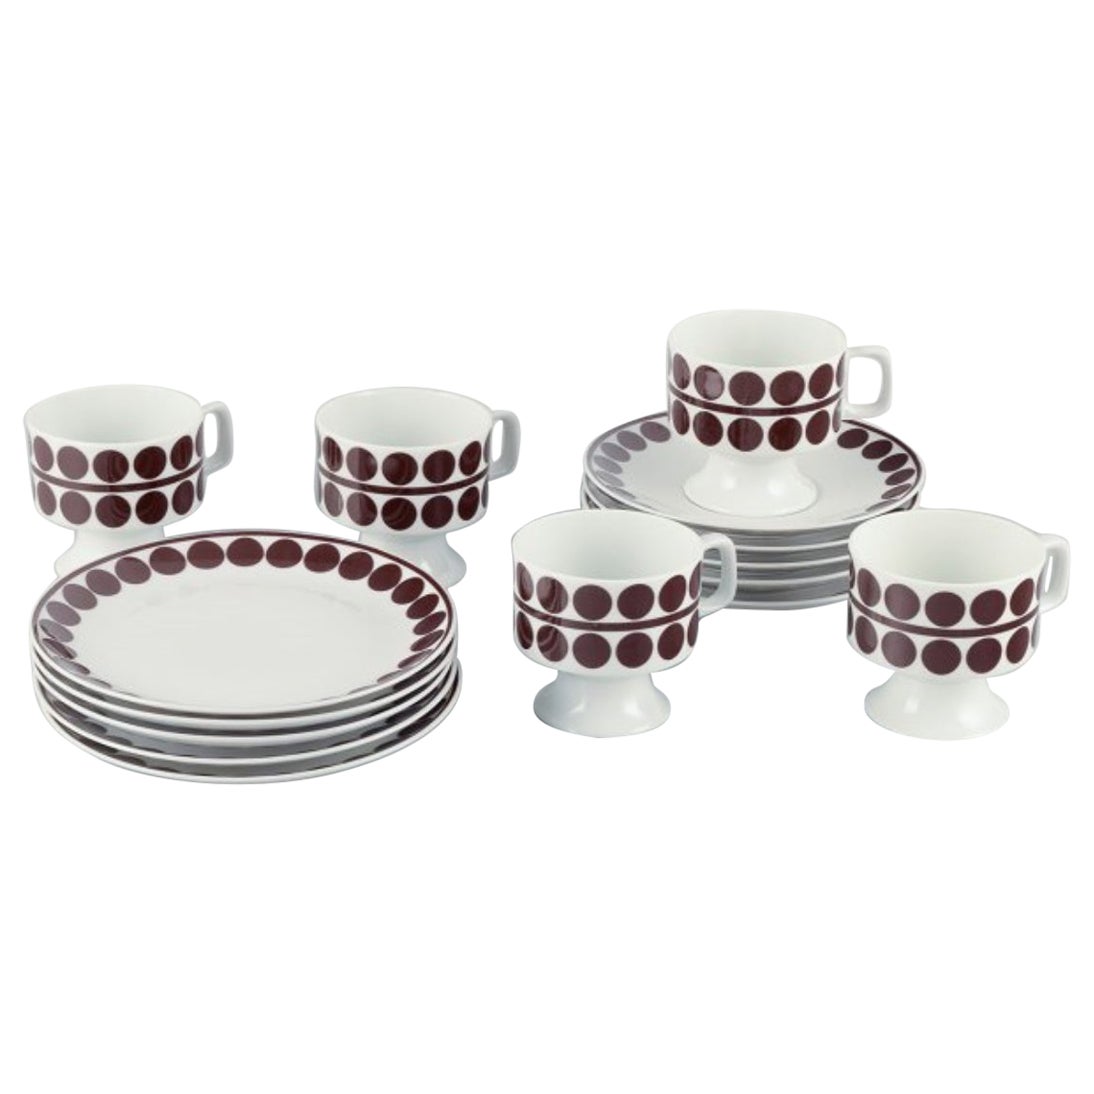 Eschenbach, Germany, a five-person retro coffee set in porcelain. For Sale